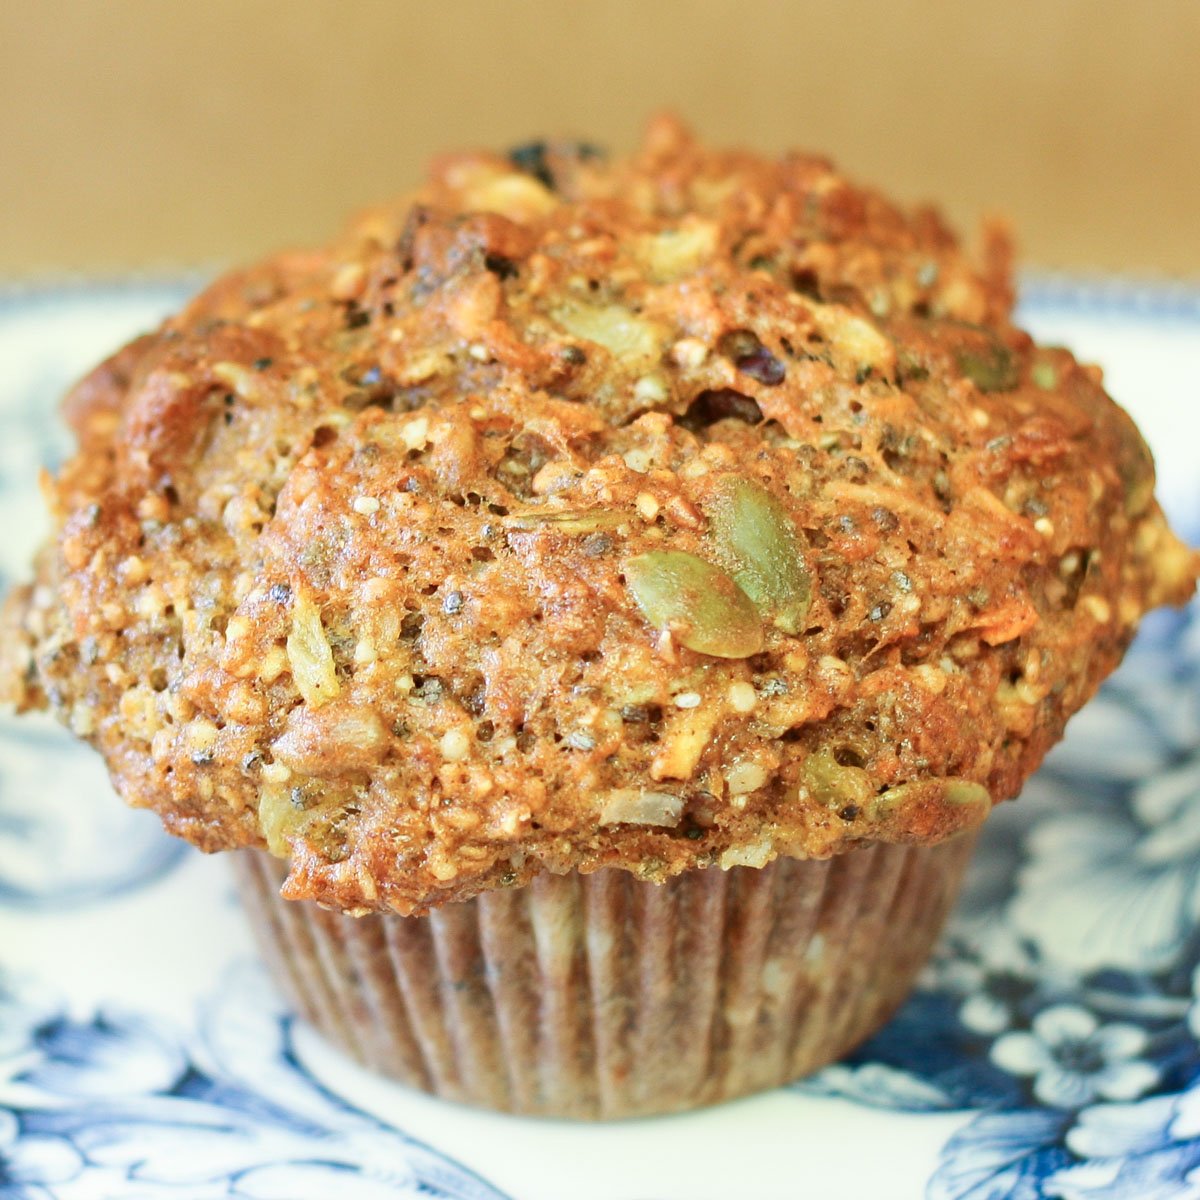 Muffin loaded with seeds, dried fruit, carrots and more on decorative blue plate.